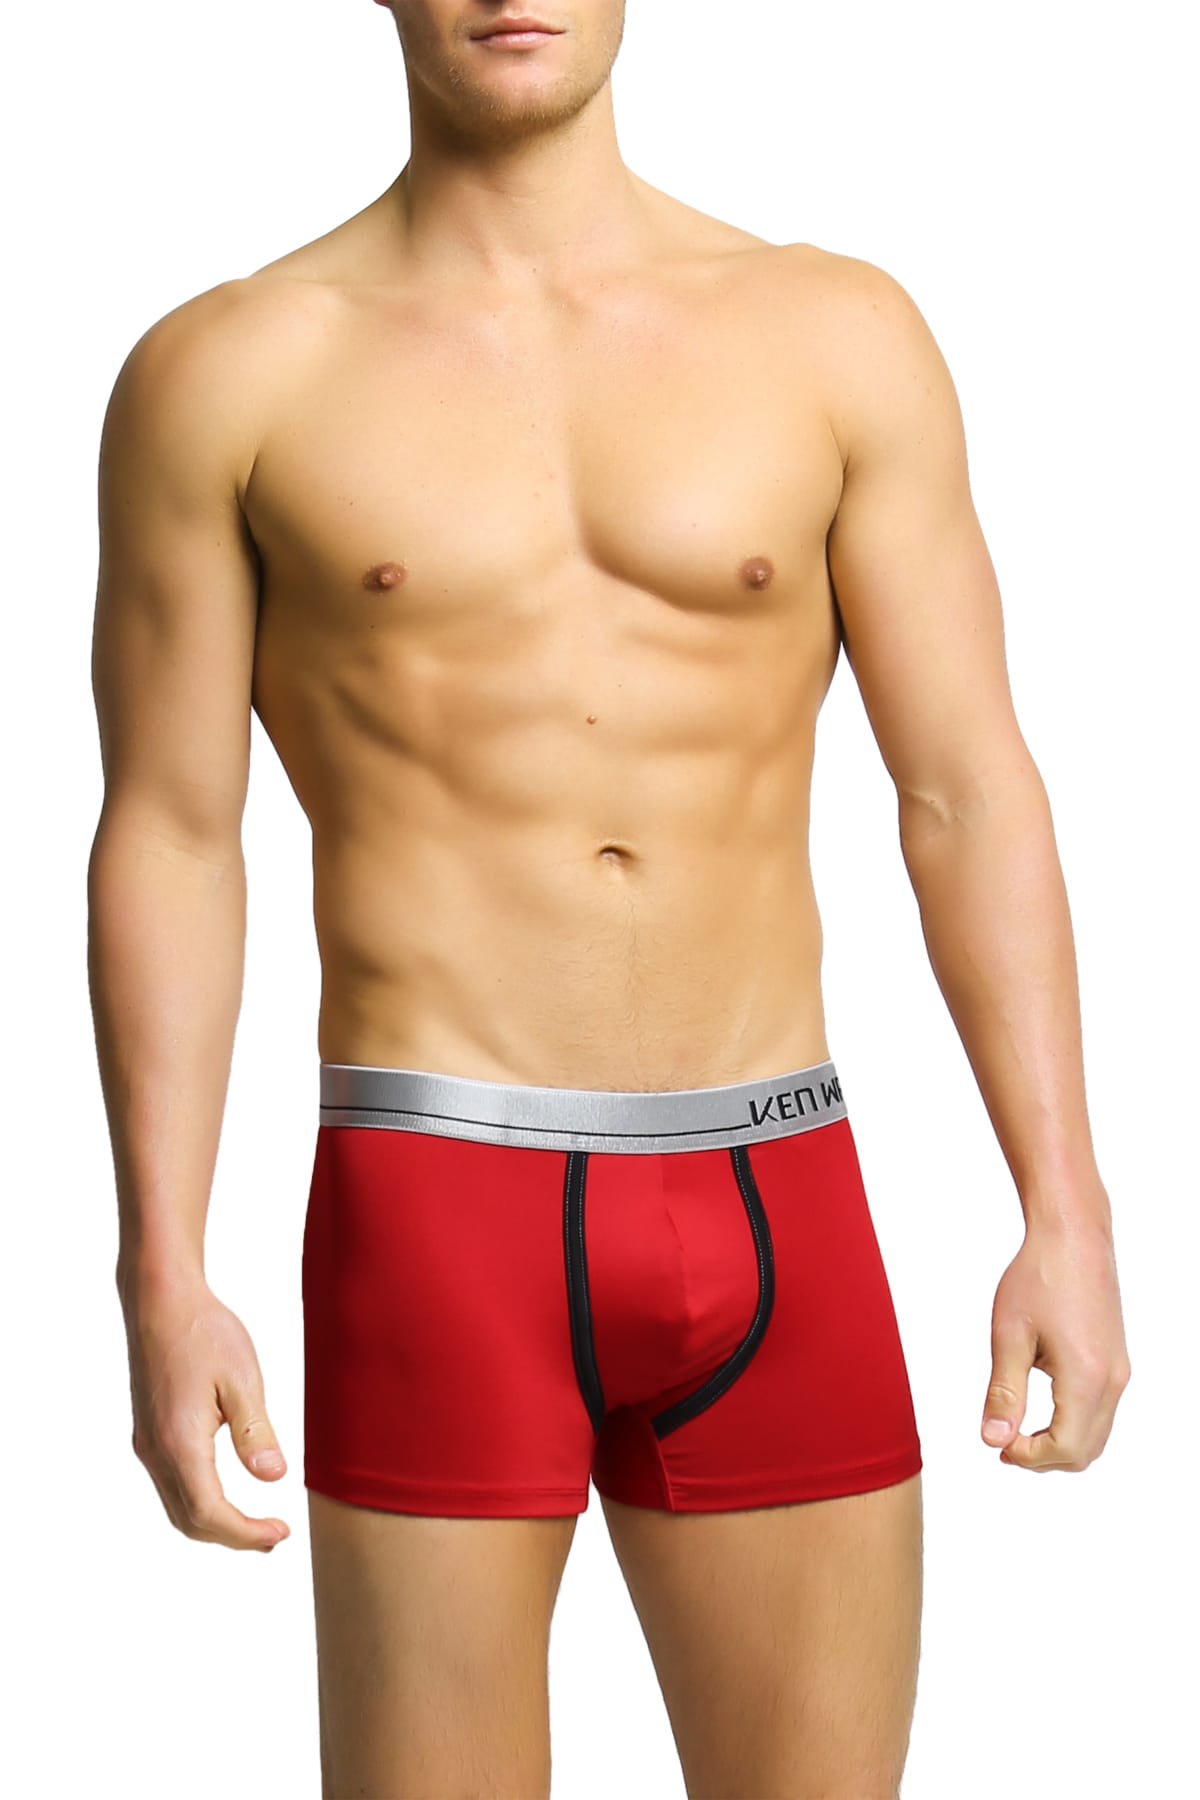 Ken Wroy Red Hot Chili Trunk